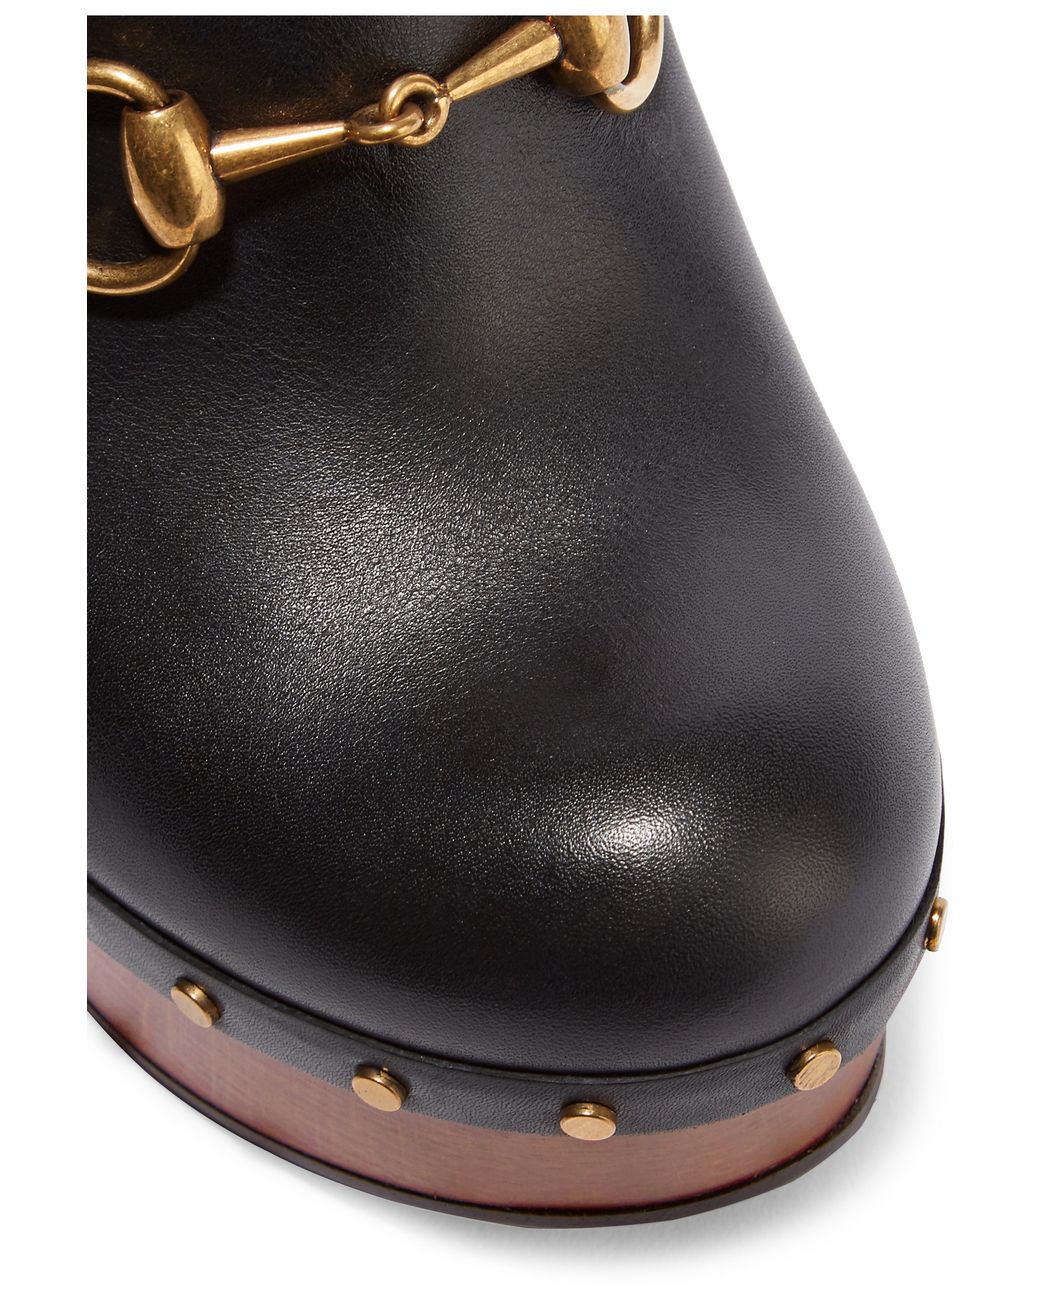 Gucci Amstel Horsebit-detailed Leather Clogs in Black | Lyst